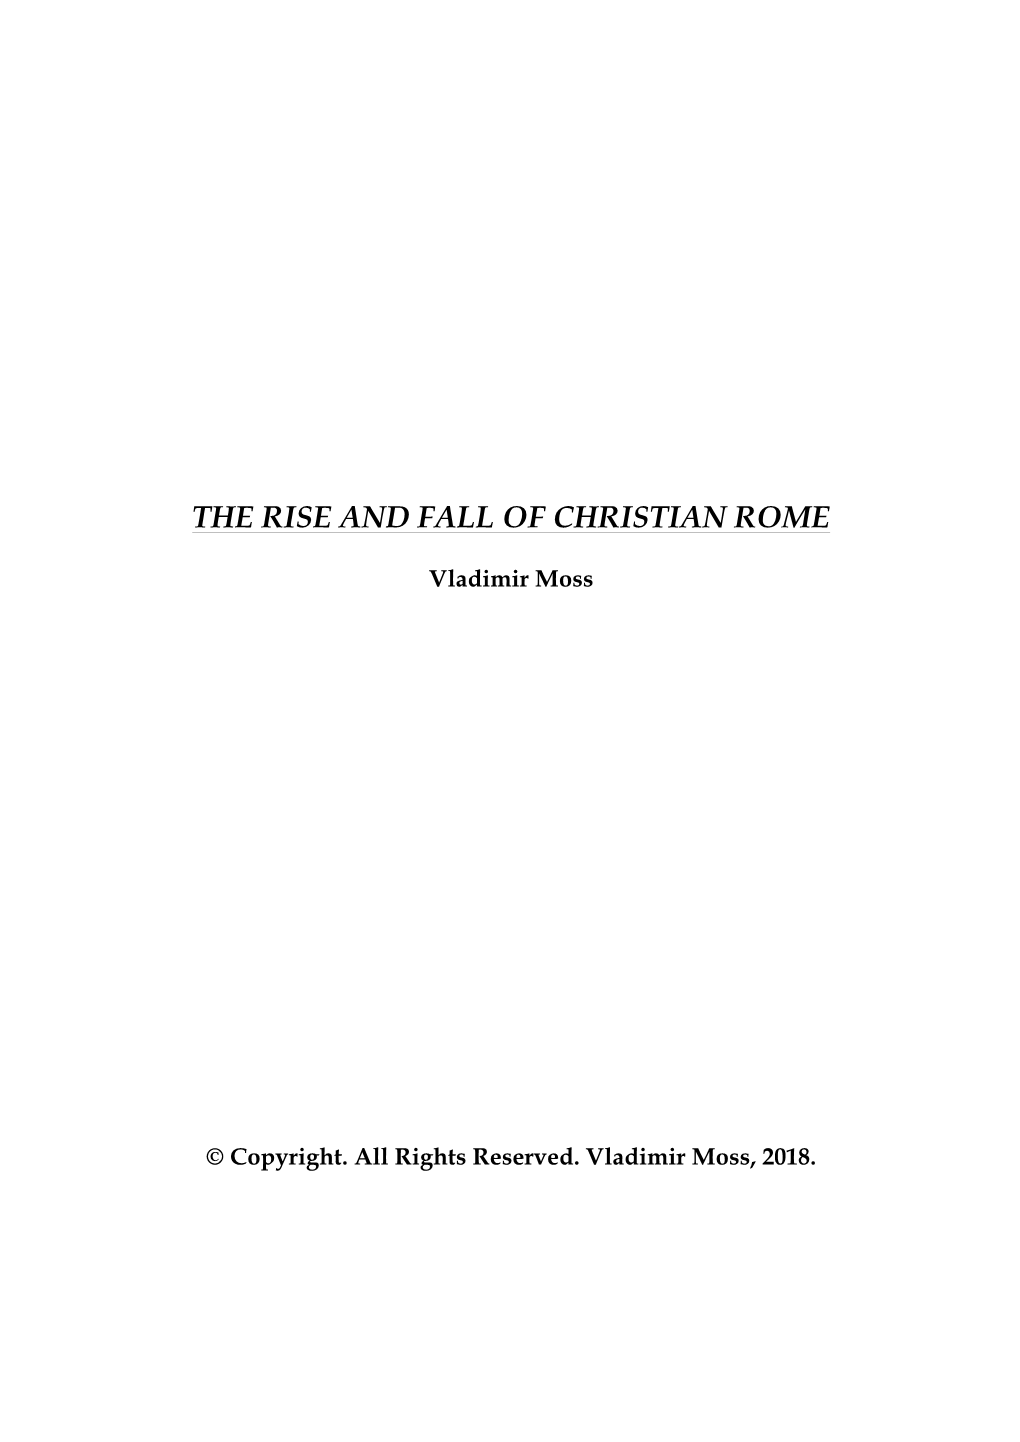 The Rise and Fall of Christian Rome